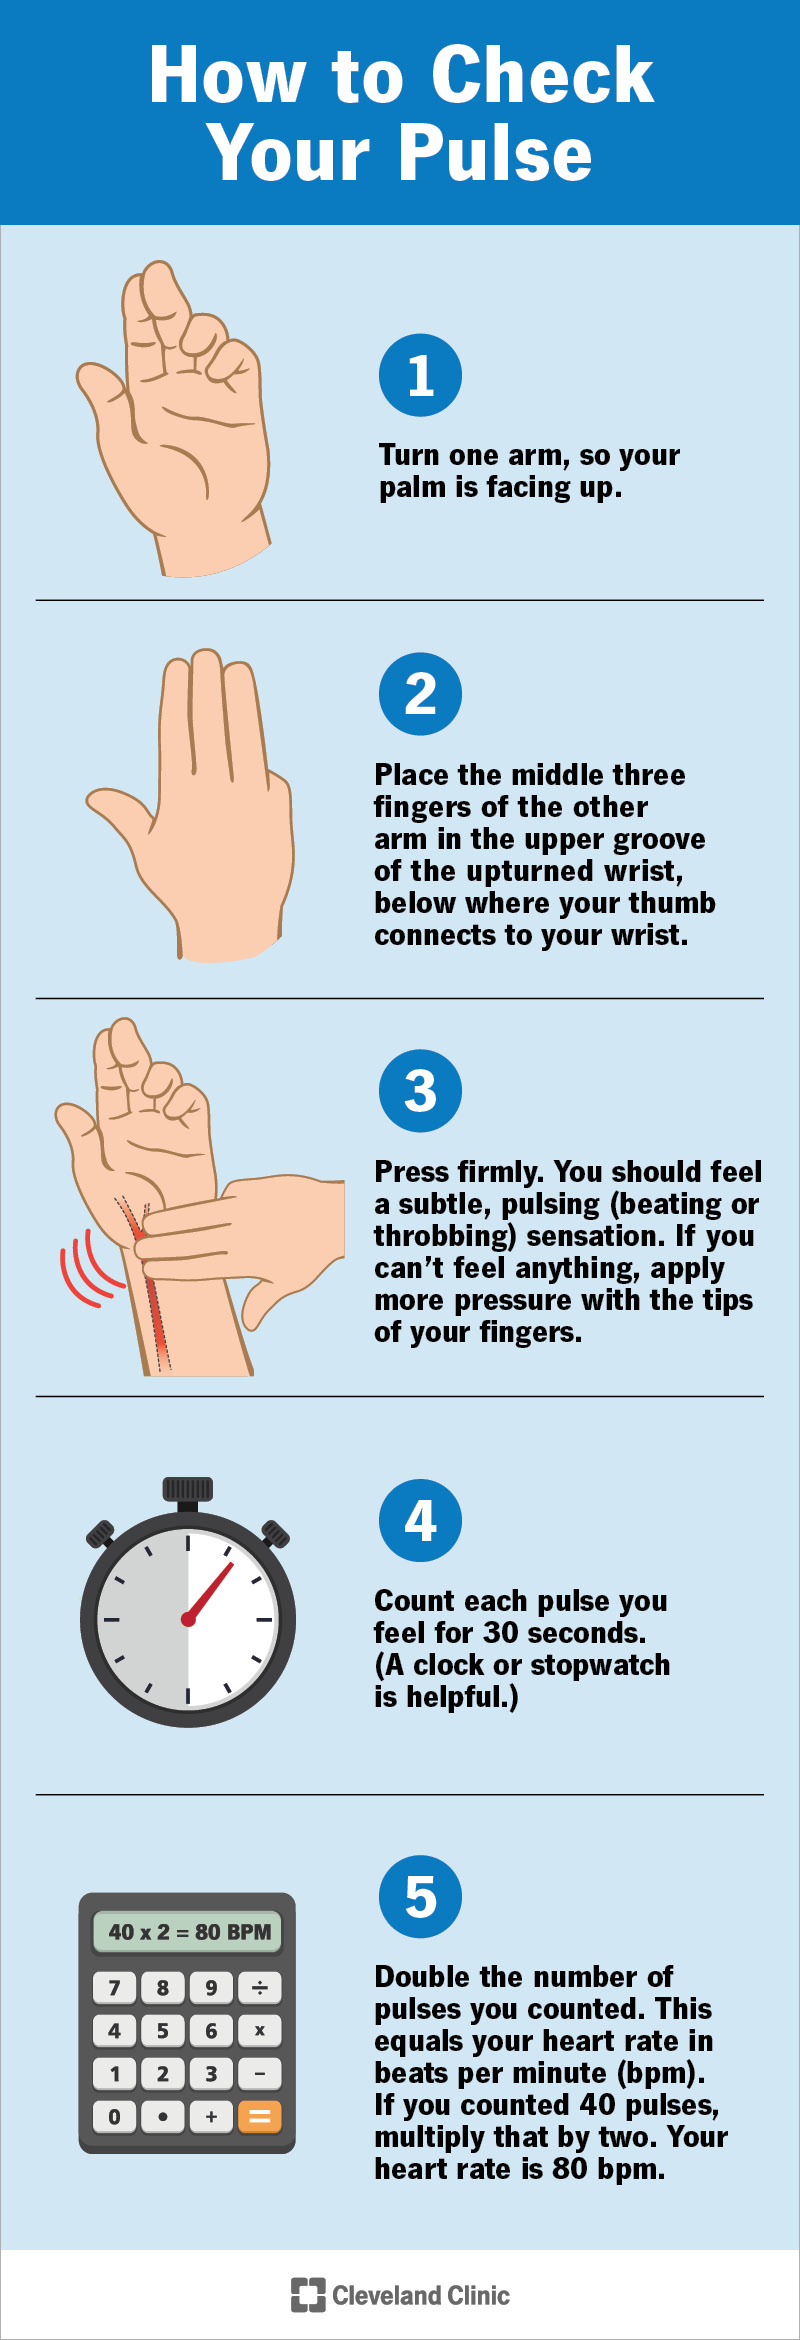 How to check your pulse in five steps